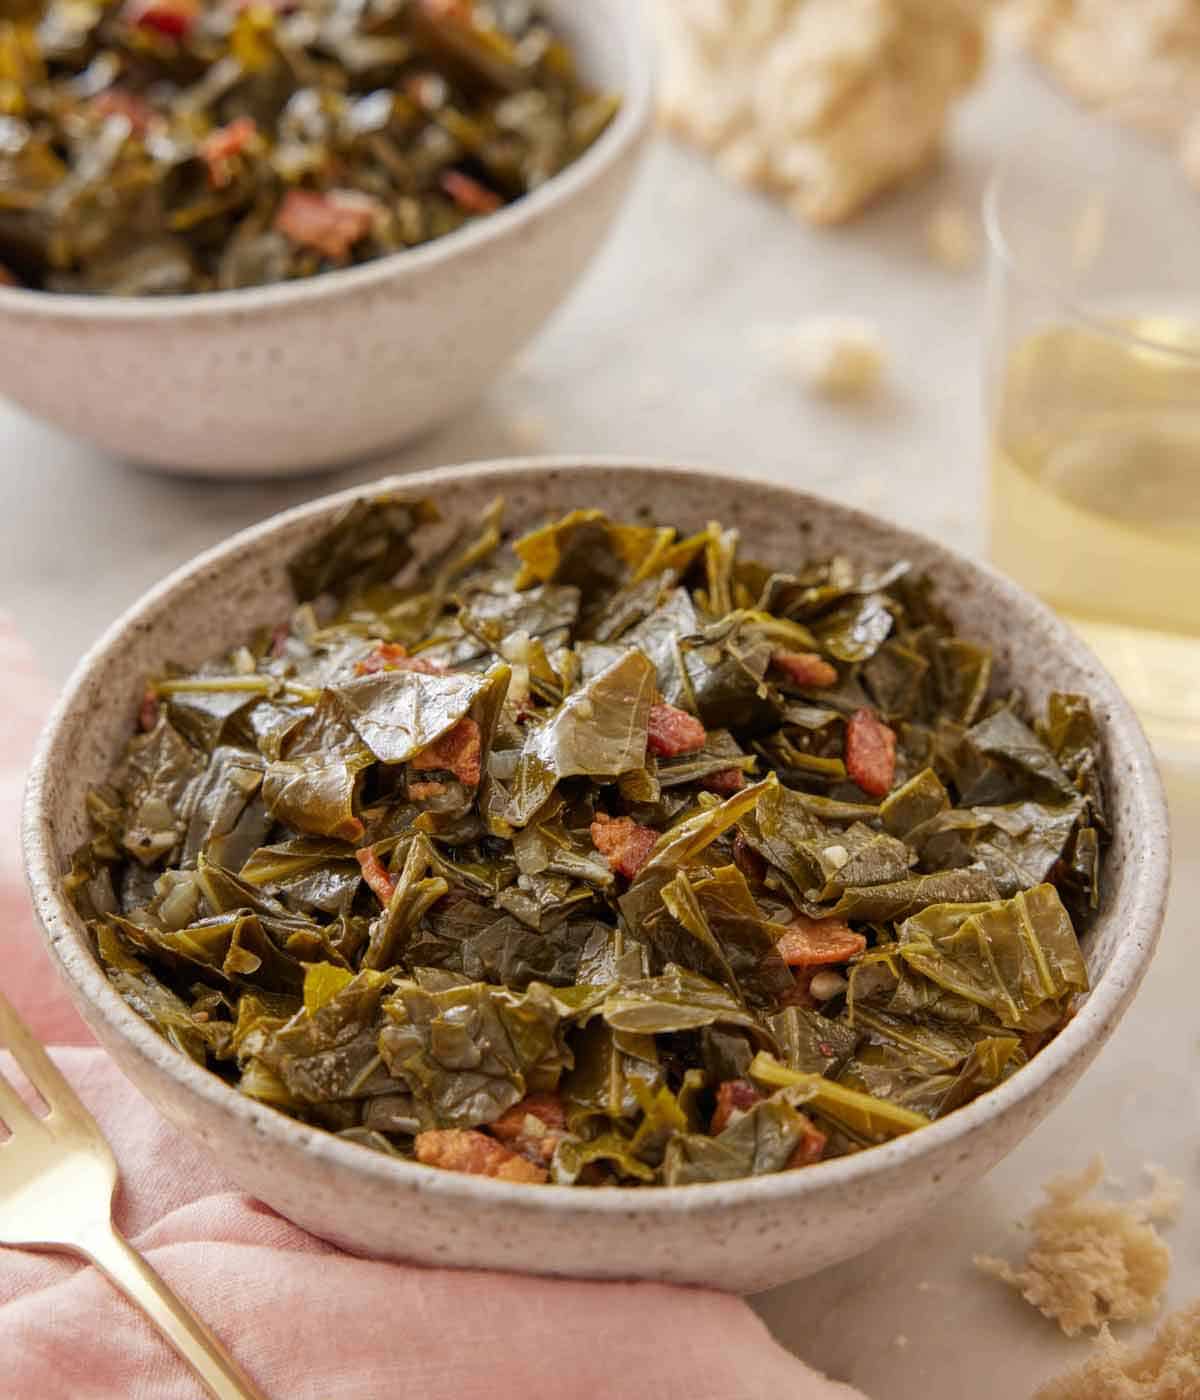 Close up view of a bowl of collard greens with a second bowl, glass of wine, and some torn bread in the back.